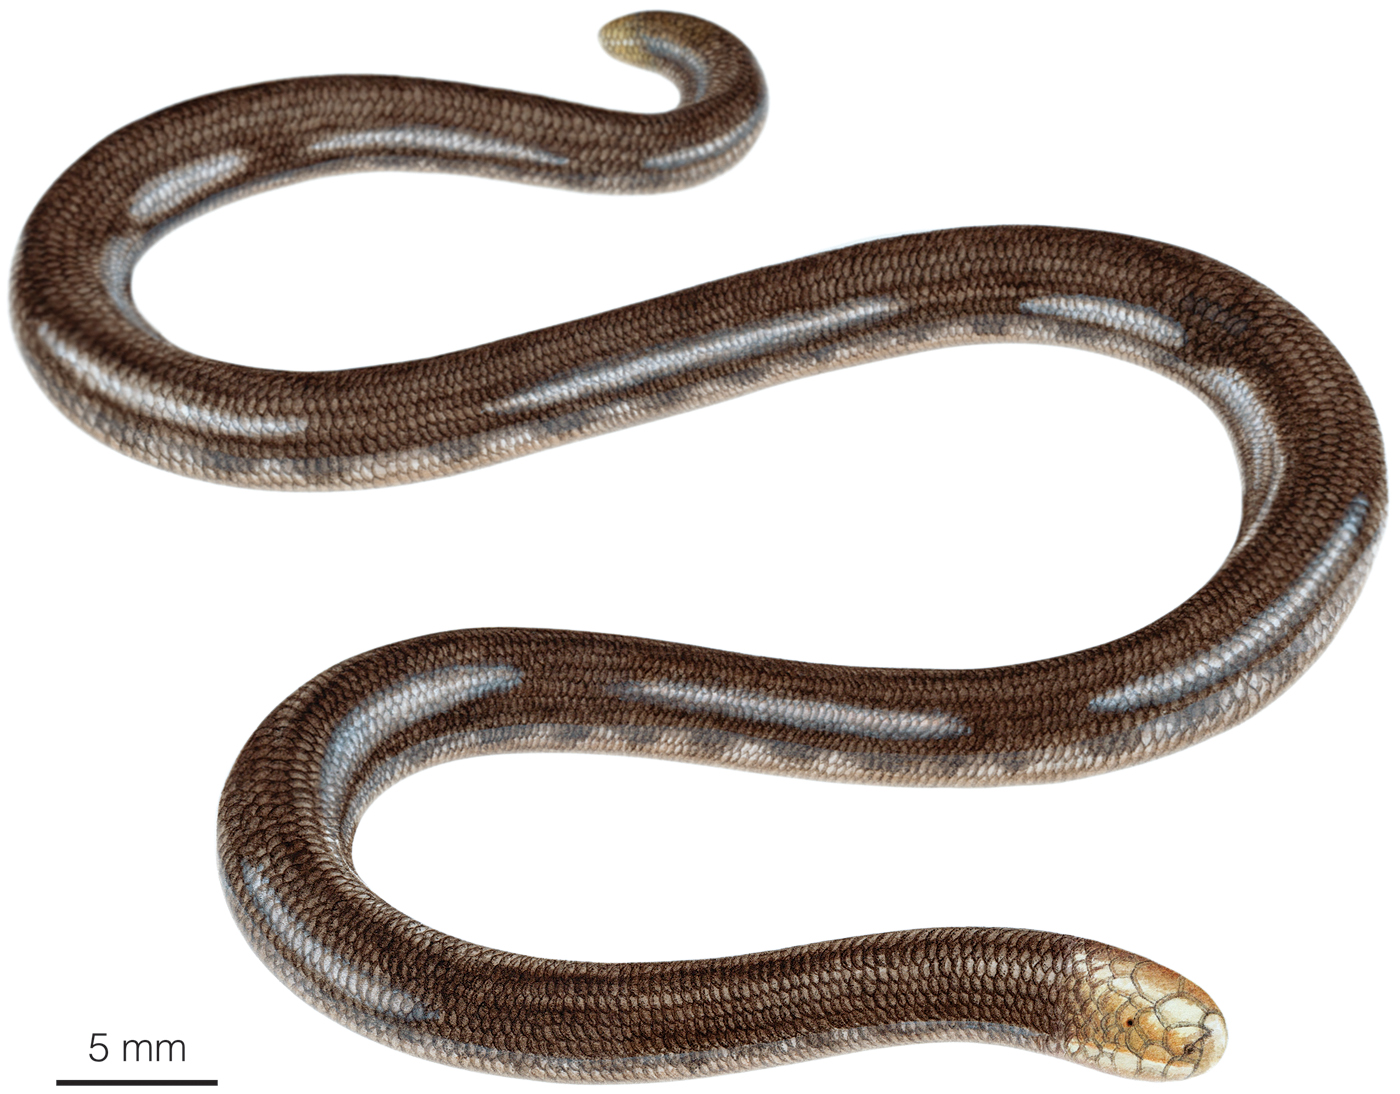 Illustration of an adult individual of Anomalepis flavapices